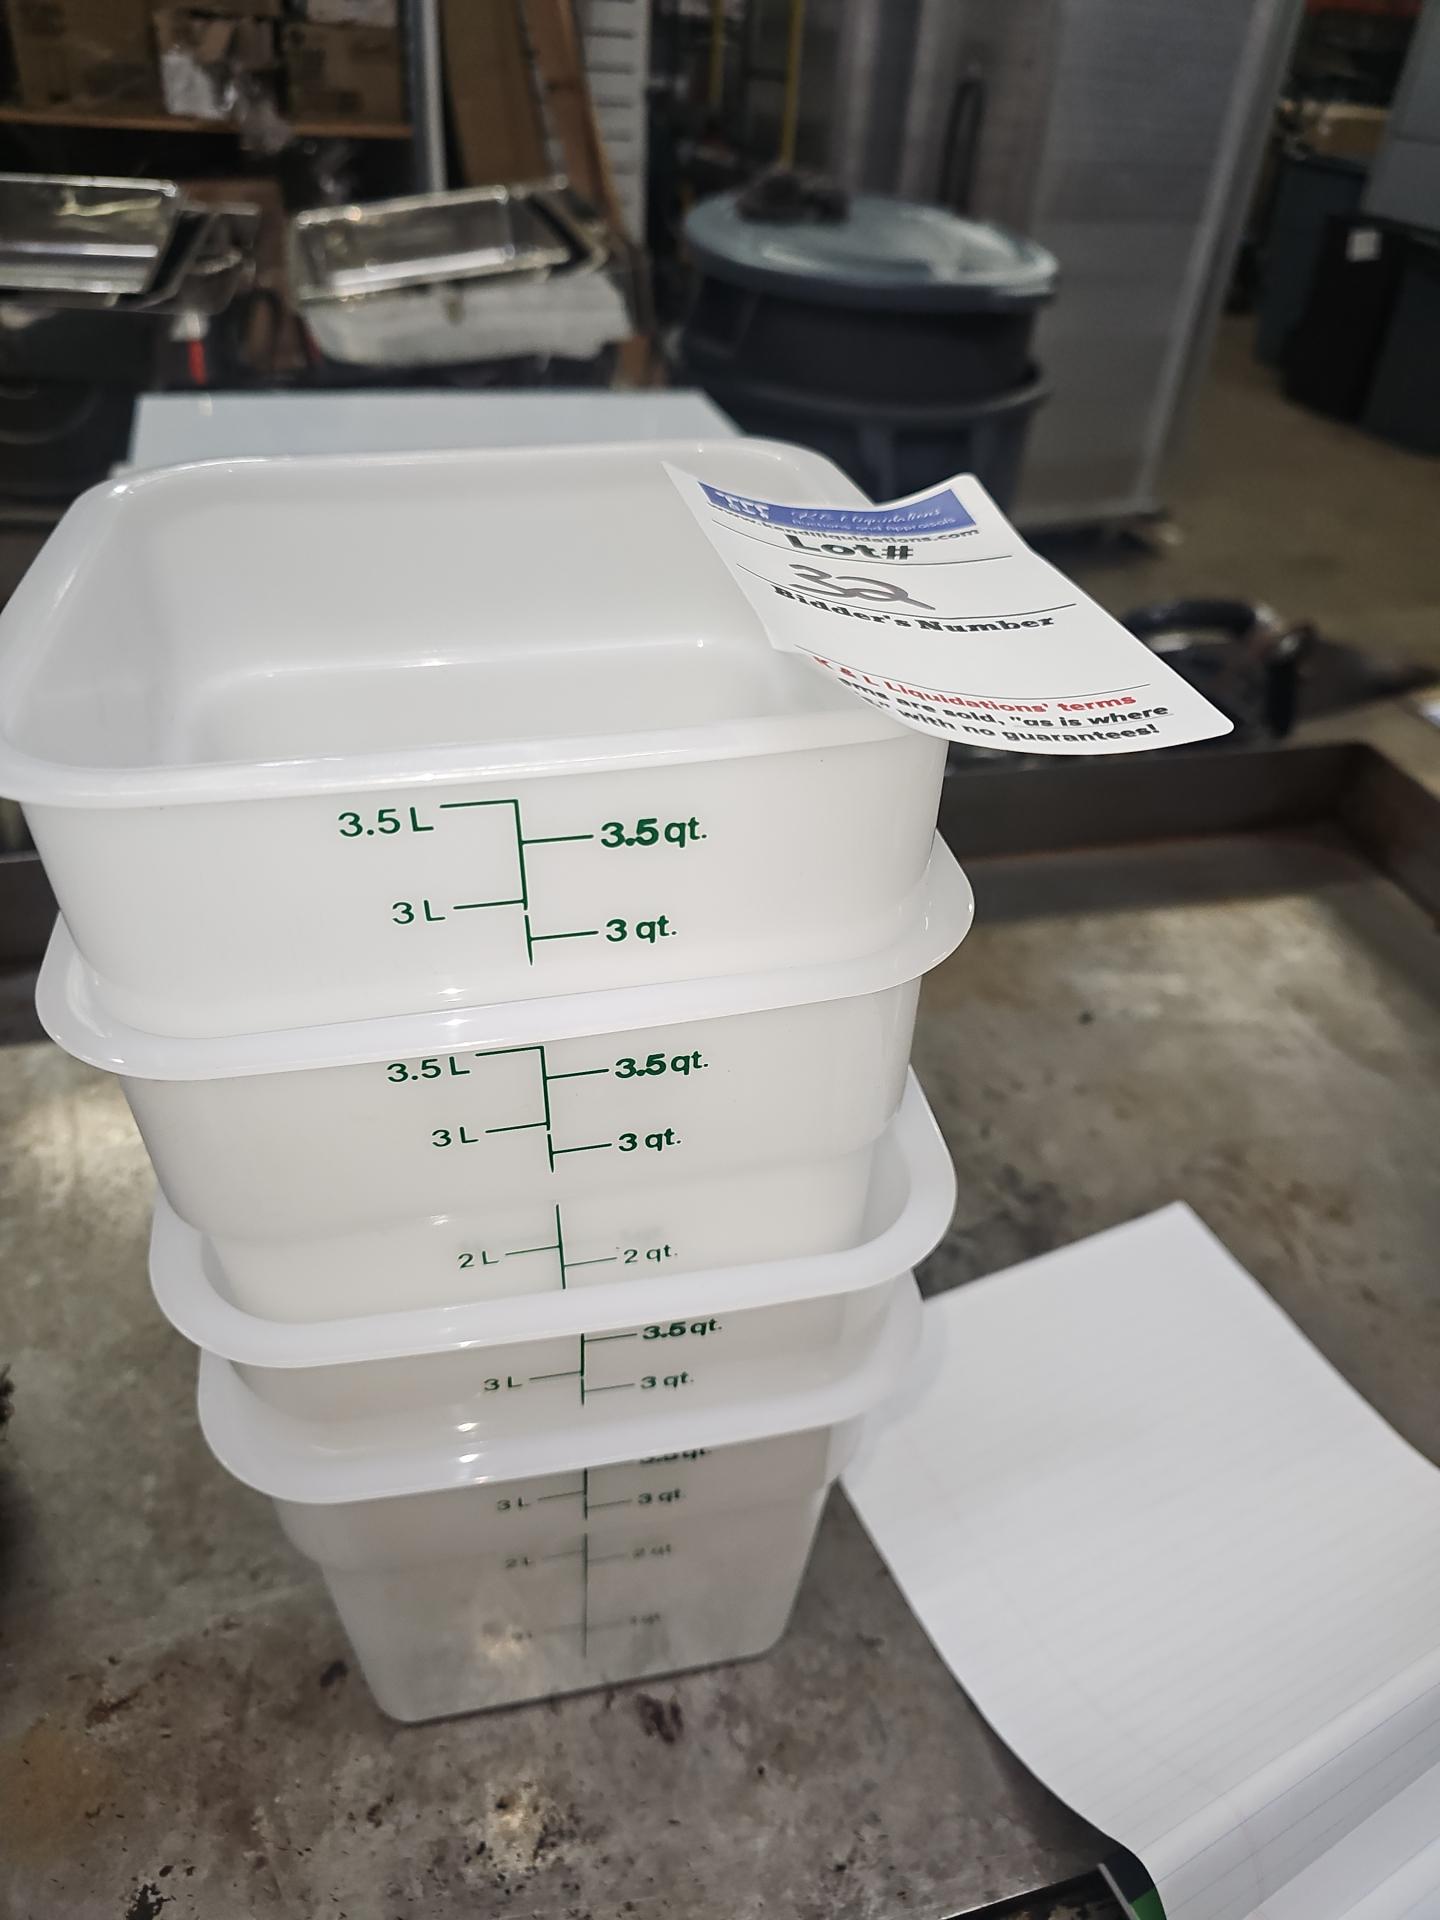 New cambro 3.5qt containers